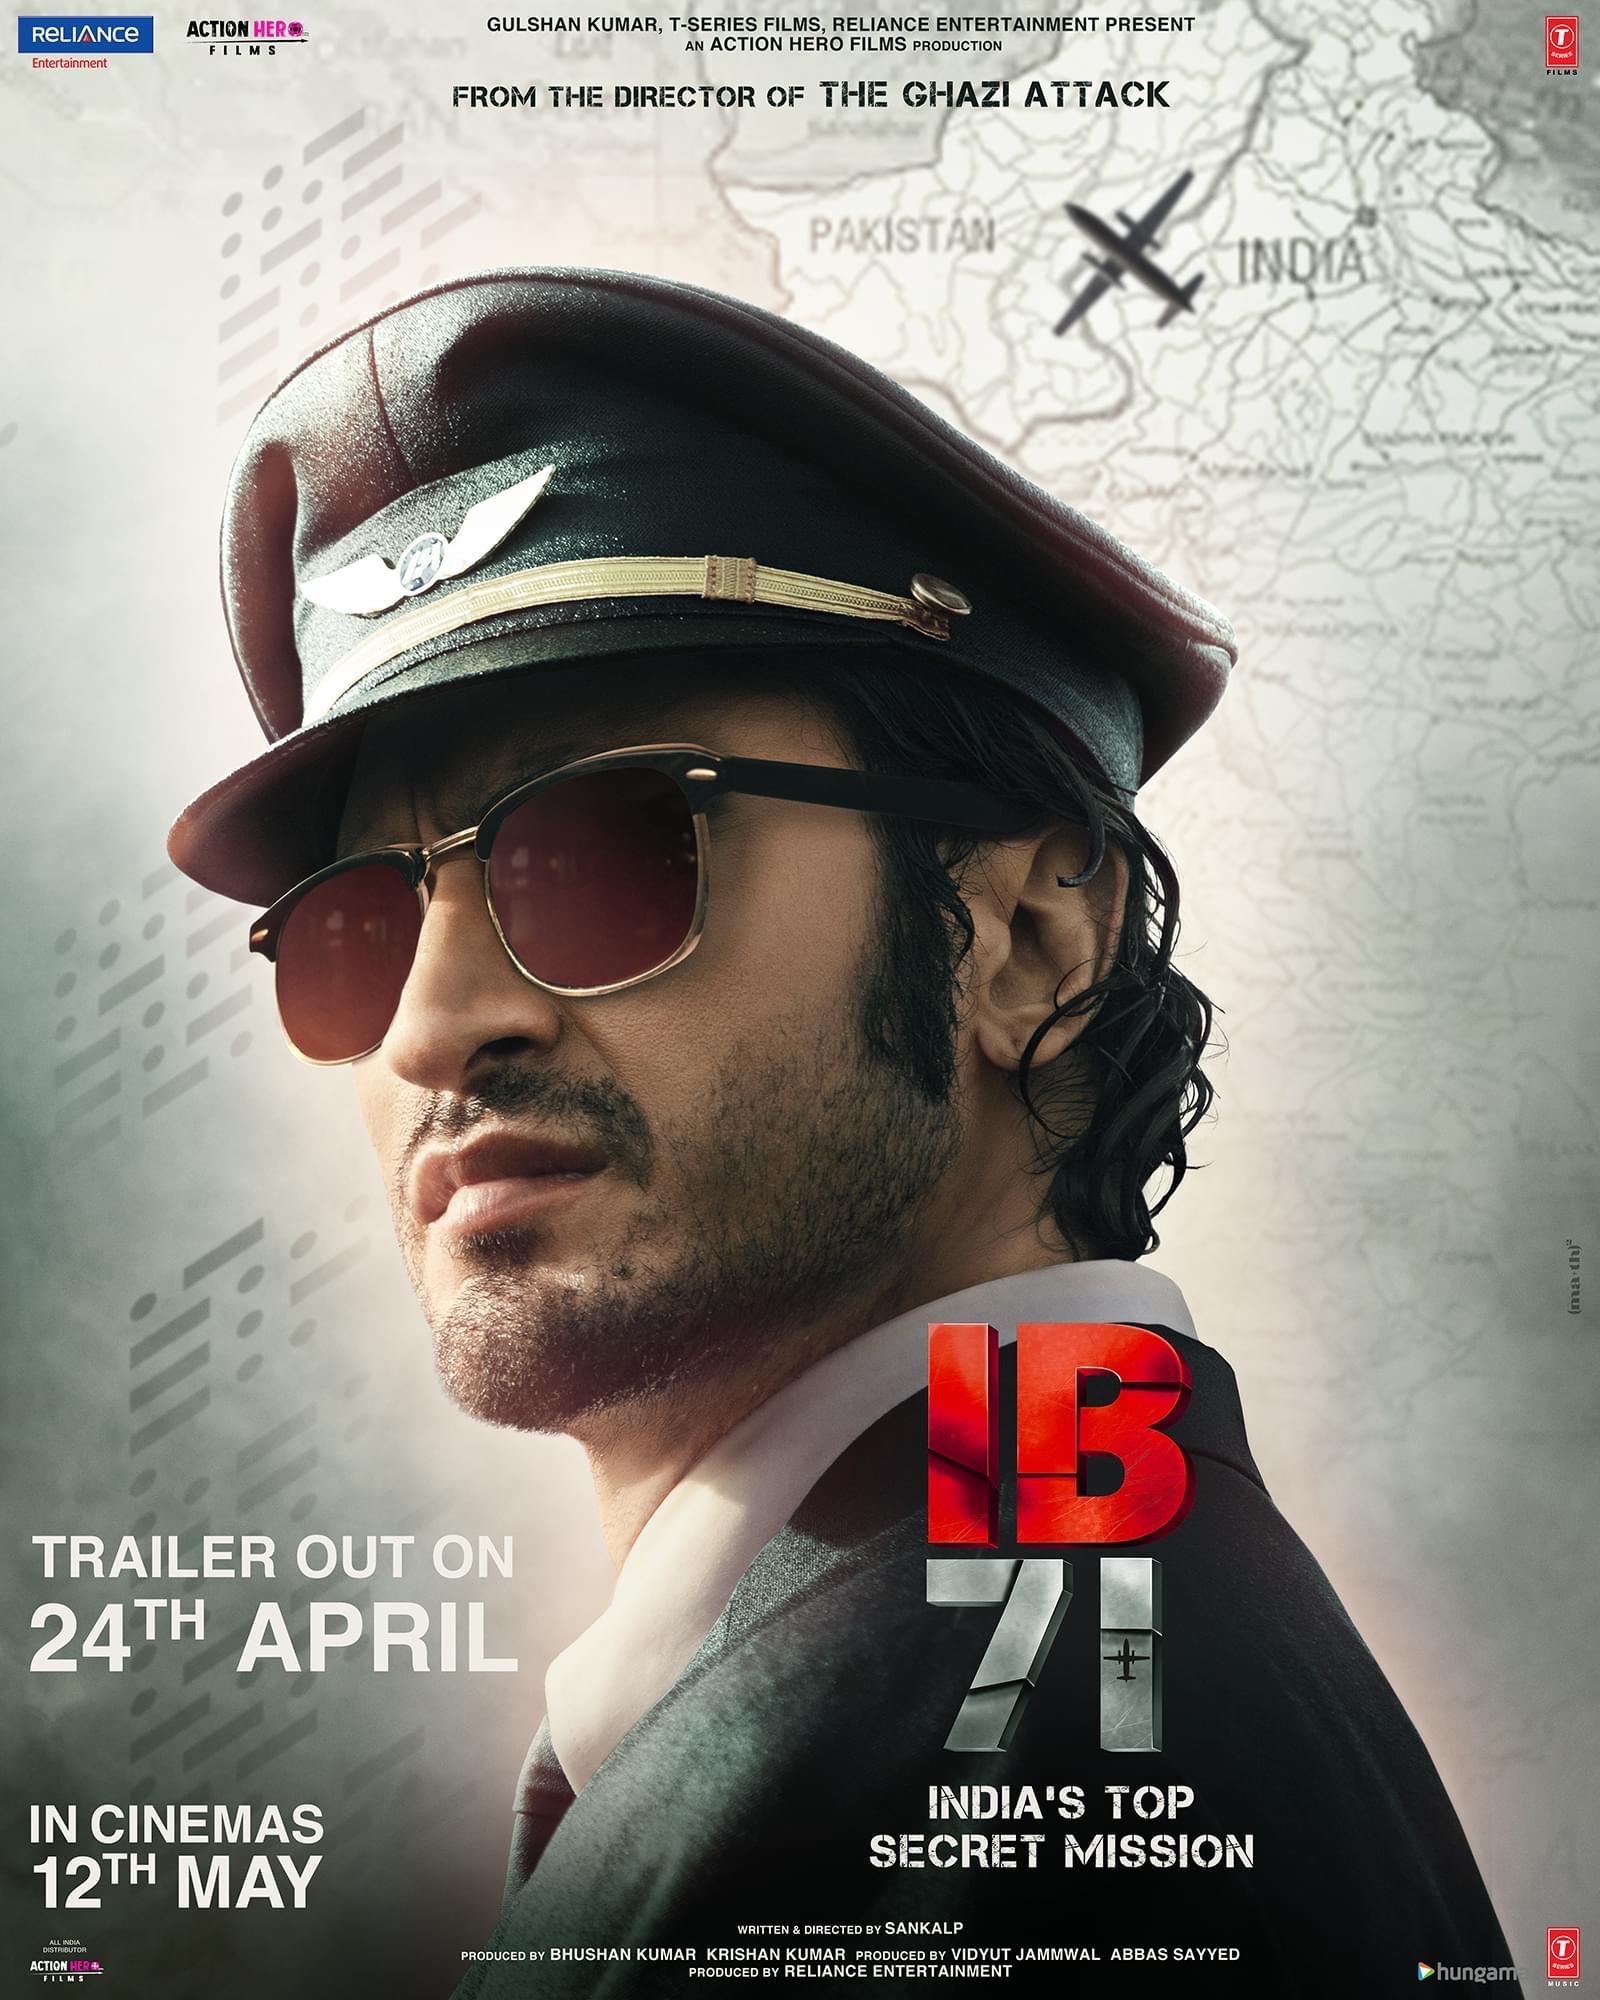 IB71 features a patriotic spy thriller. An untold story based on true events that played a crucial role in India's victory during the 1971 Indo-Pak war